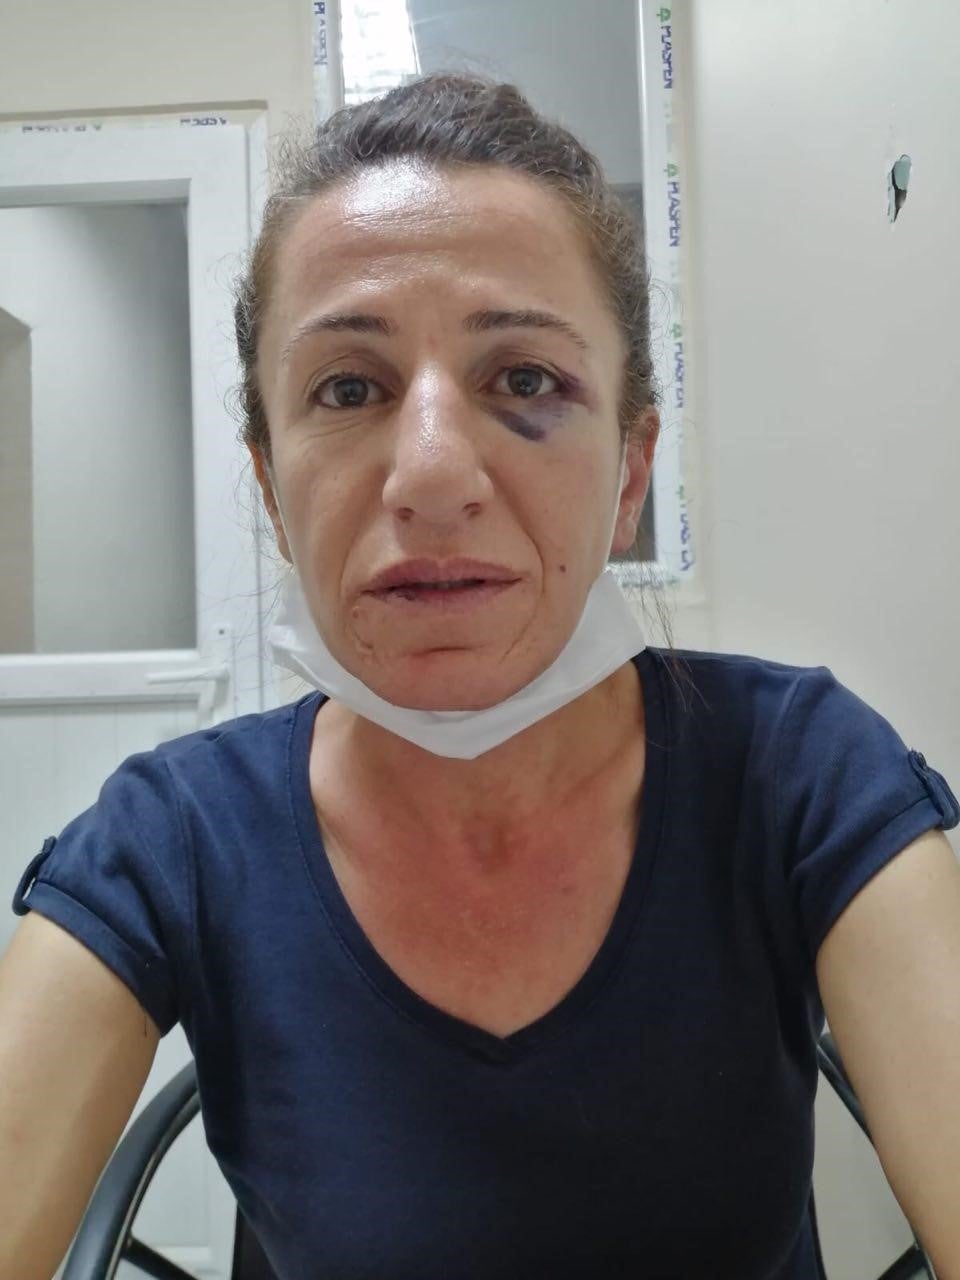 Sevil Cetin alleges she was attacked and bitten by police dogs and beaten by police officers in the apartment she was living in.